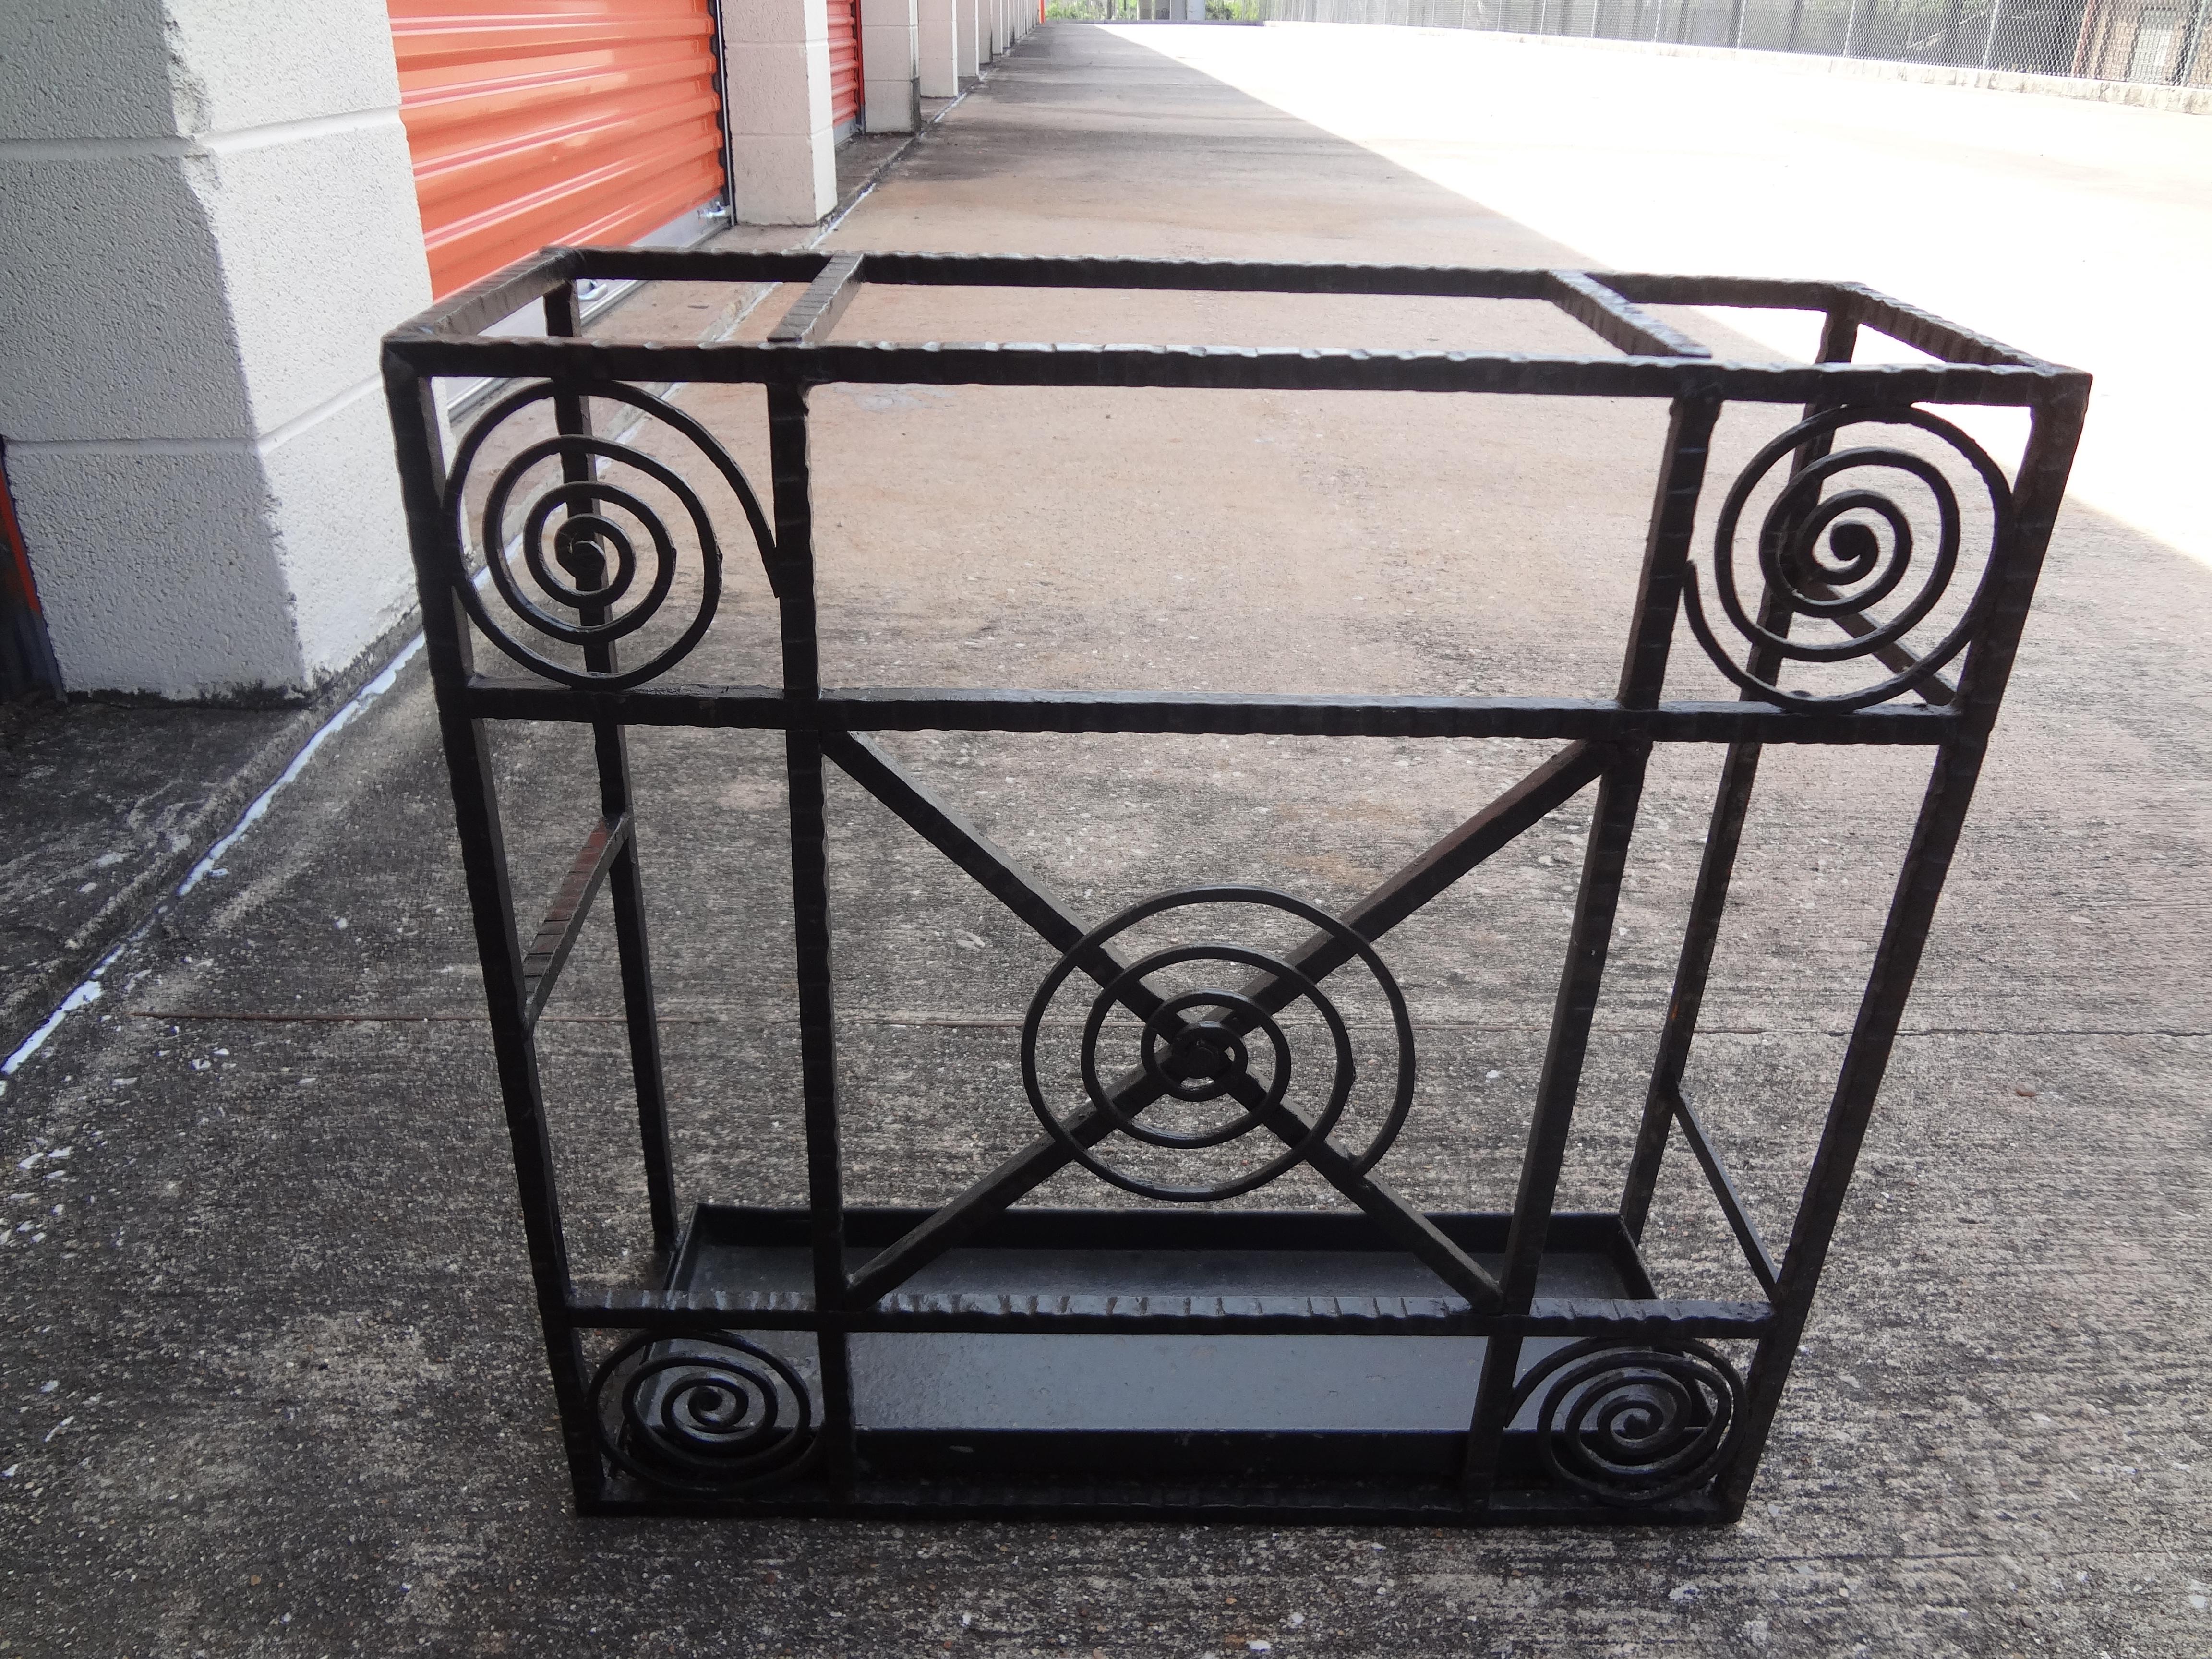 French Art Deco wrought iron umbrella stand.
This great French Art Deco black umbrella stand would look perfect at the entrance of your home! The interesting geometric pattern has been hand forged and is made of wrought iron. This gorgeous Edgar